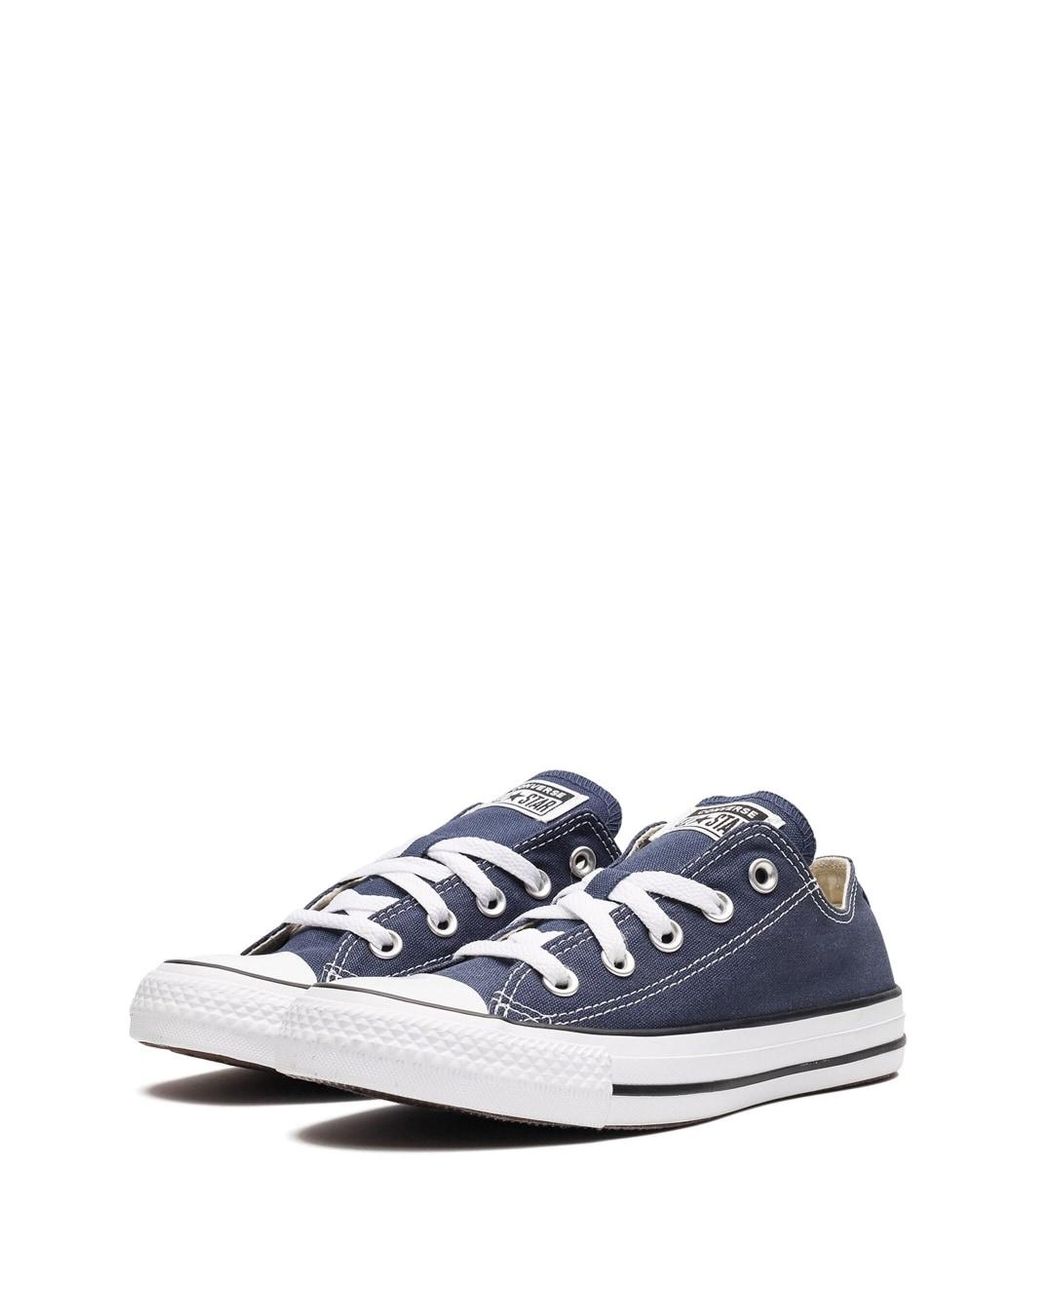 Converse Chuck Taylor All Star Ox Sneakers in Blue | Lyst